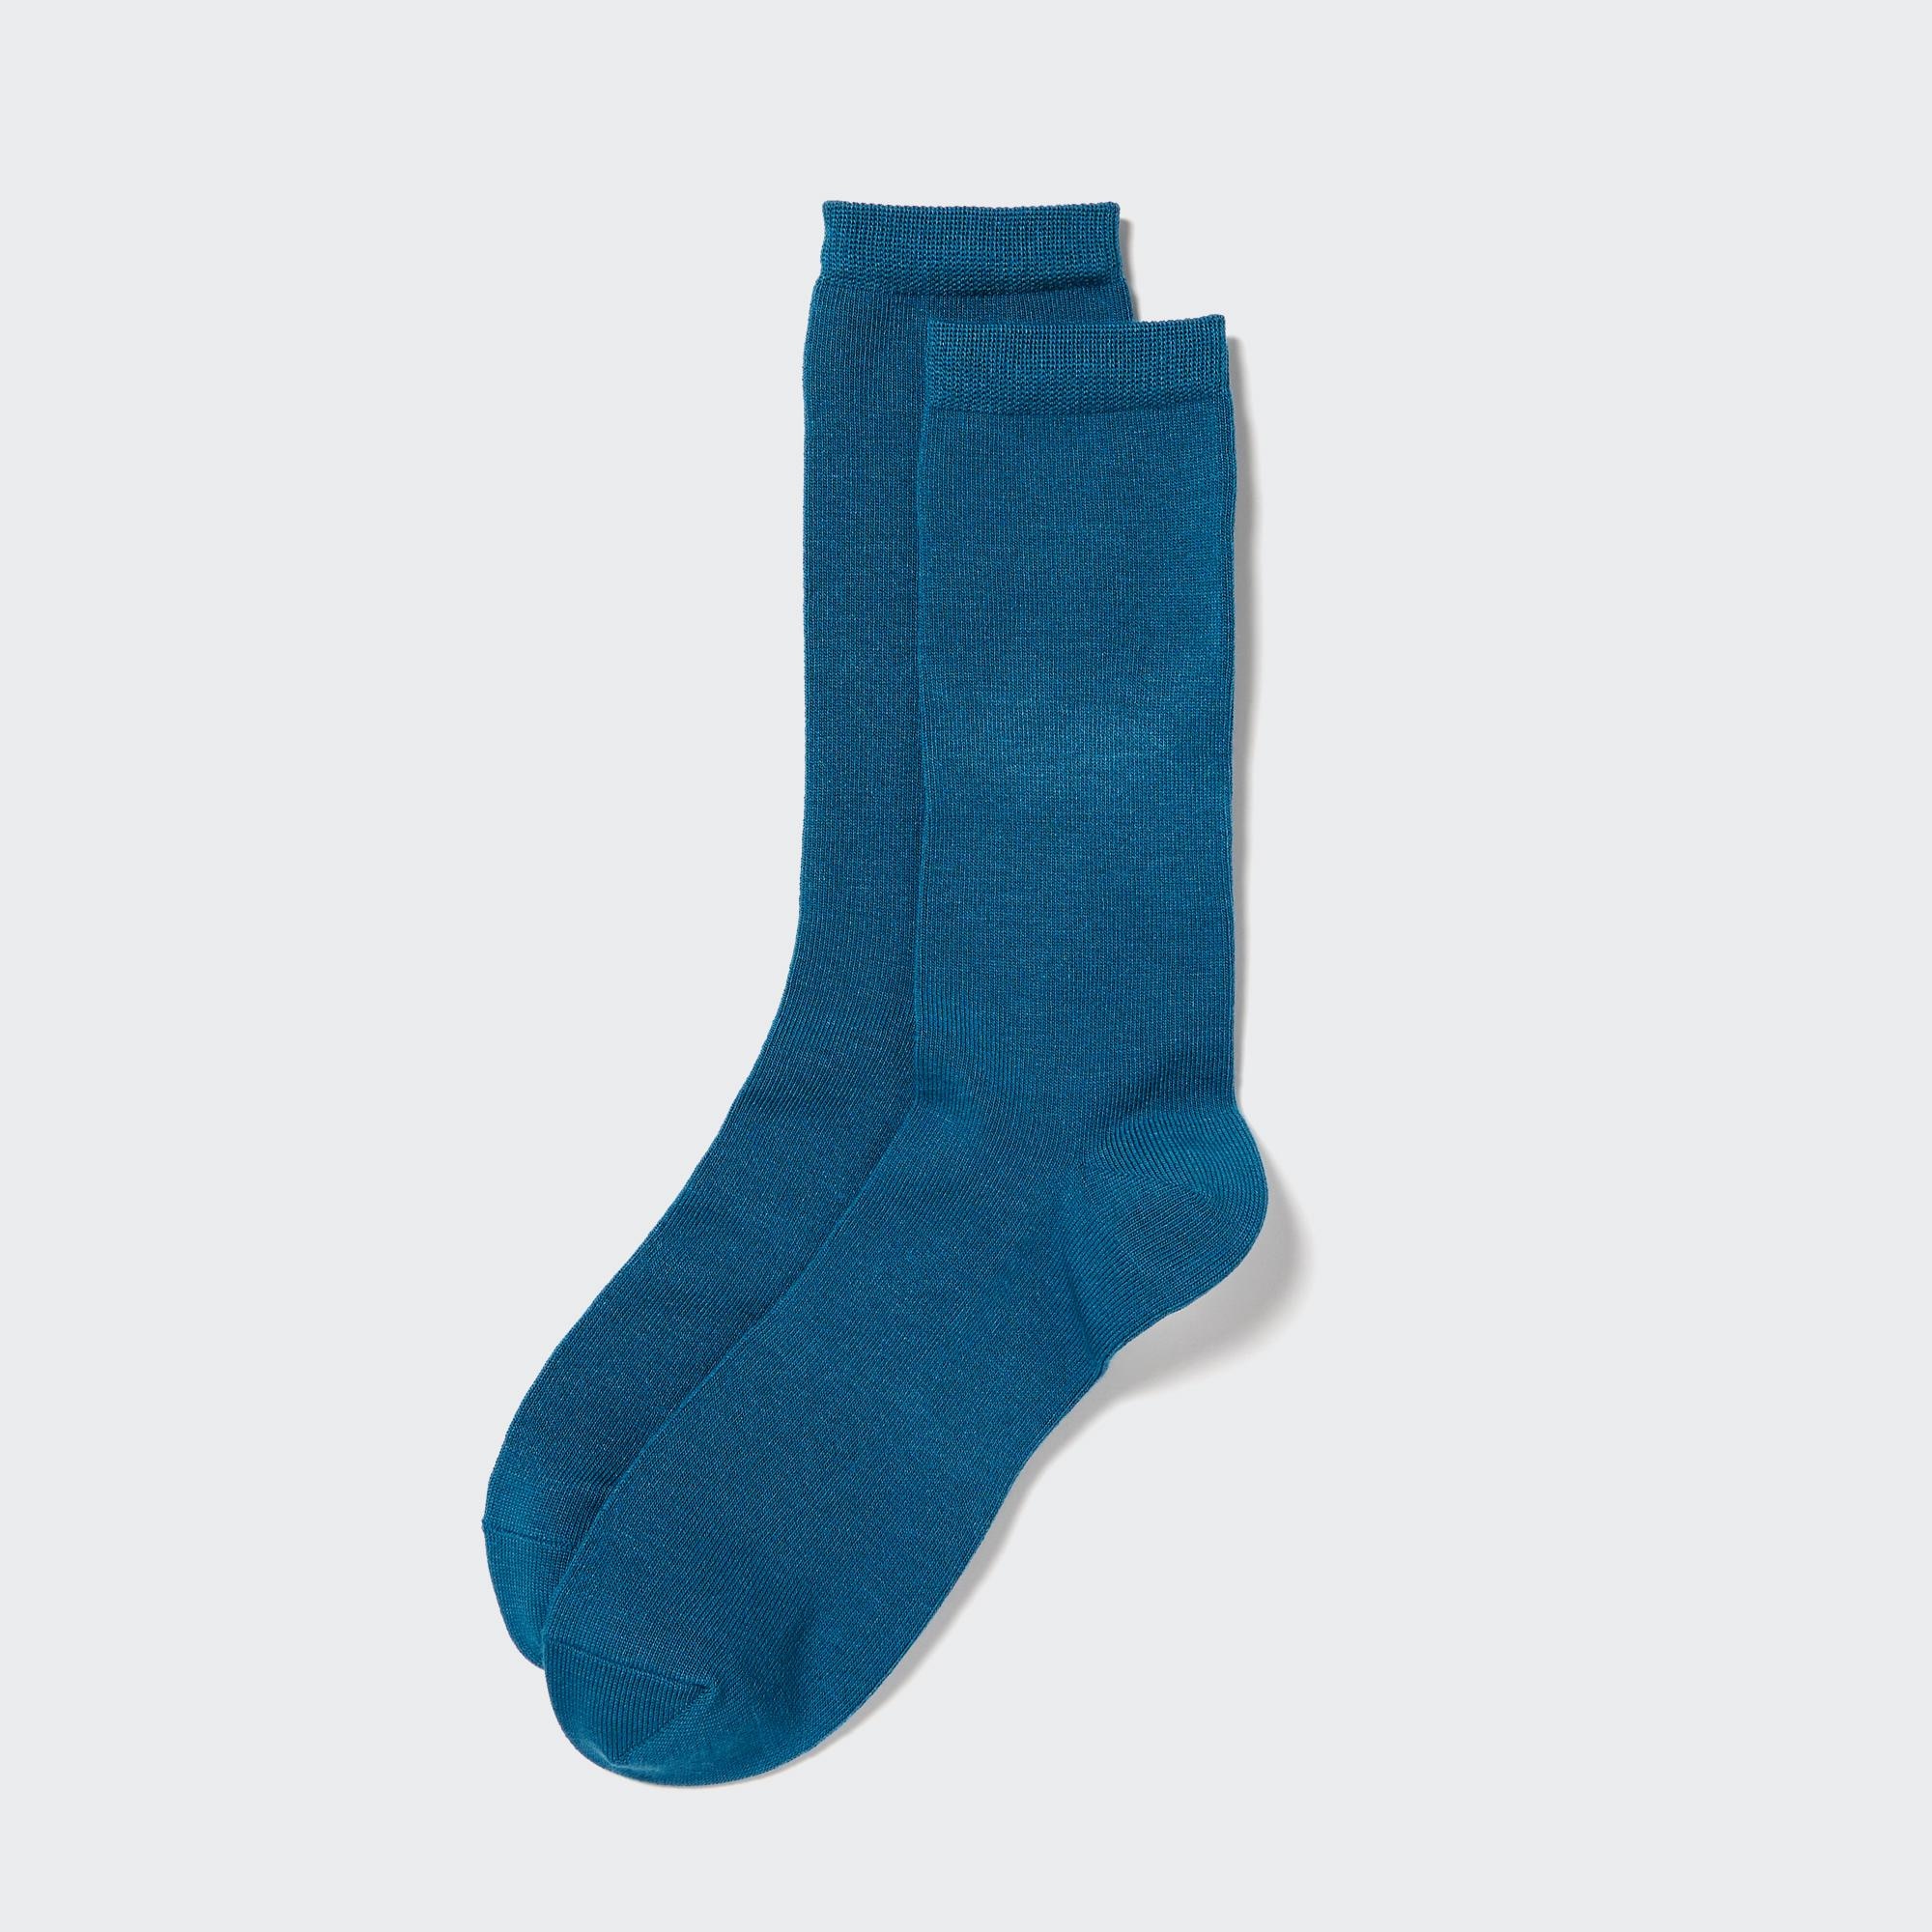 14 Best Socks for Men of 2023, Tested & Reviewed by Experts